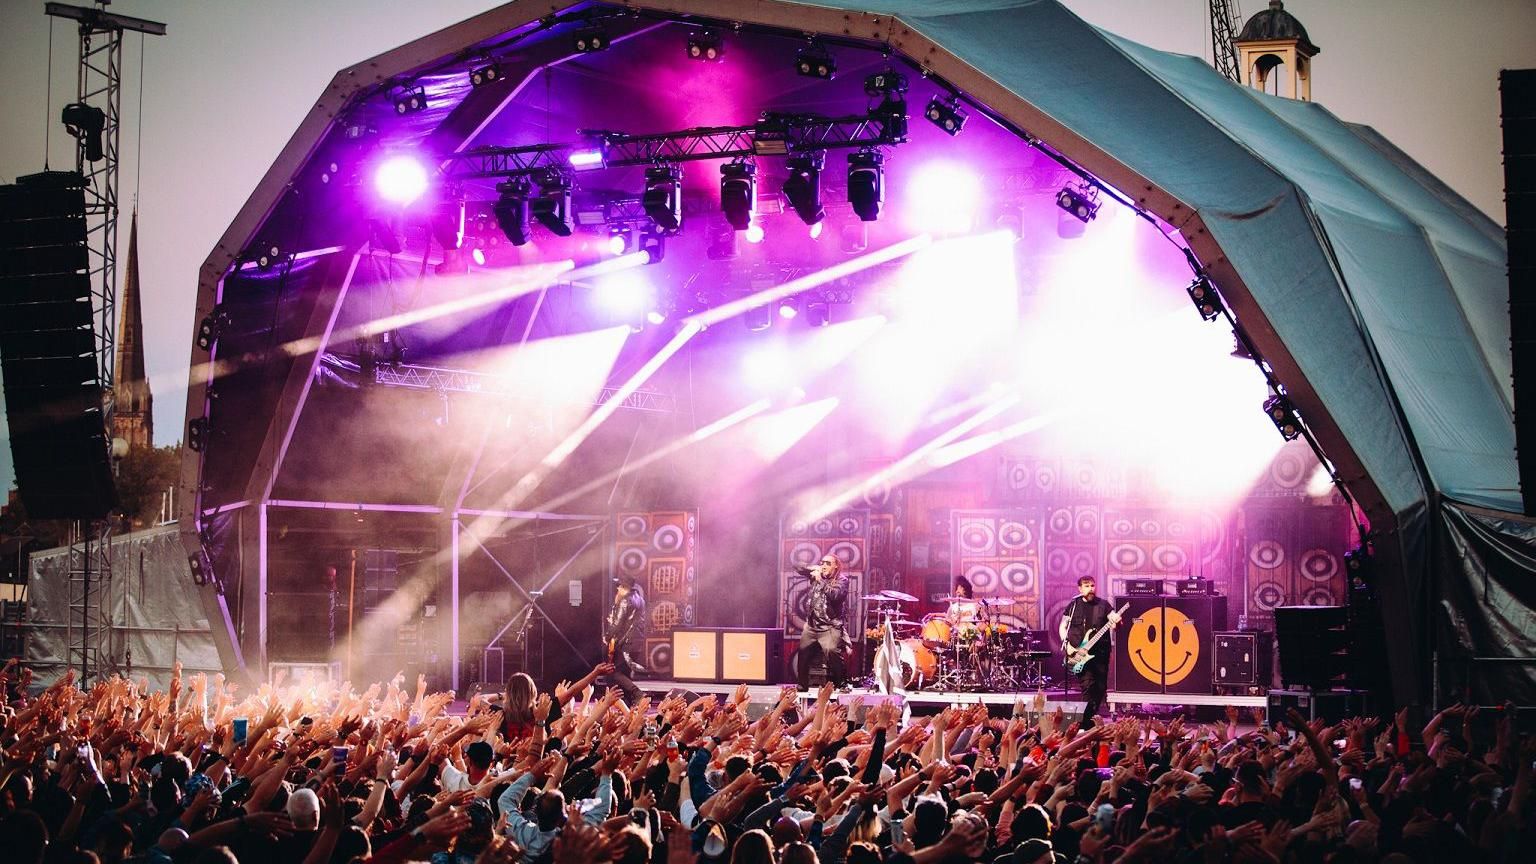 Skindred performing at Bristol Sounds. A large crowd of people can be seen with their arms up. The band is on stage with instruments including drums and guitars. 